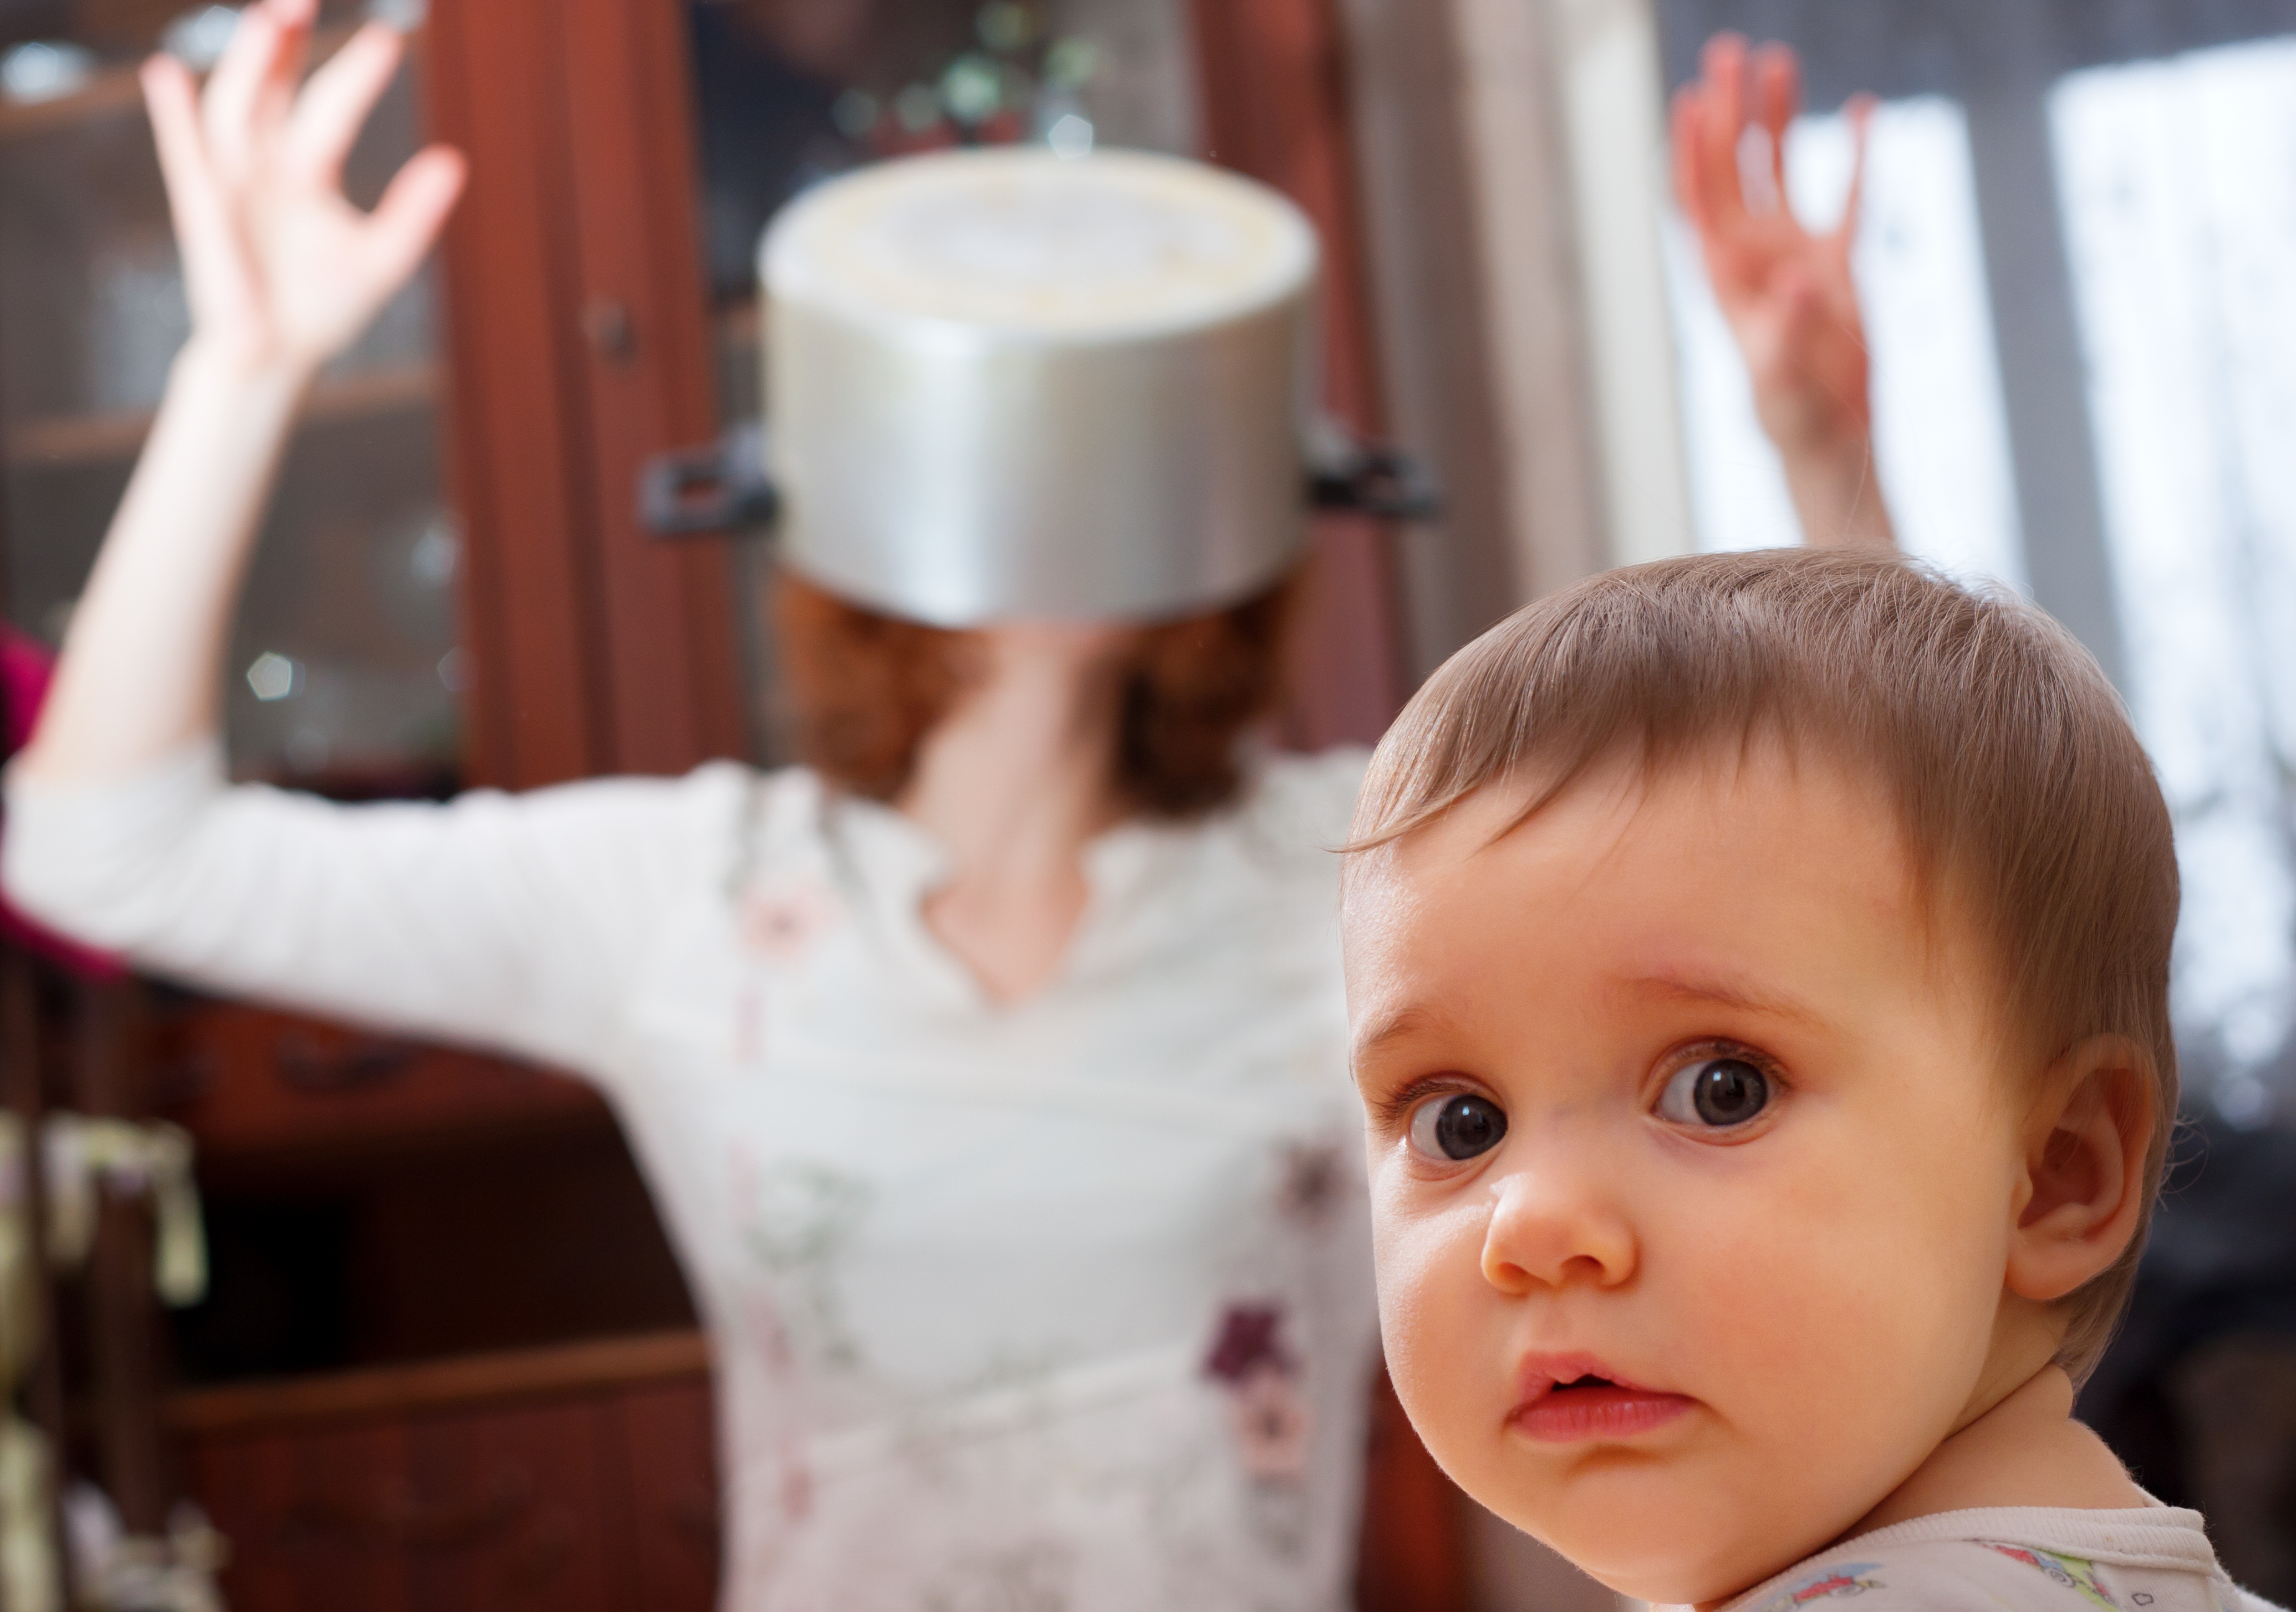 Confused looking baby stares at camera while mother wears saucepan on head in background